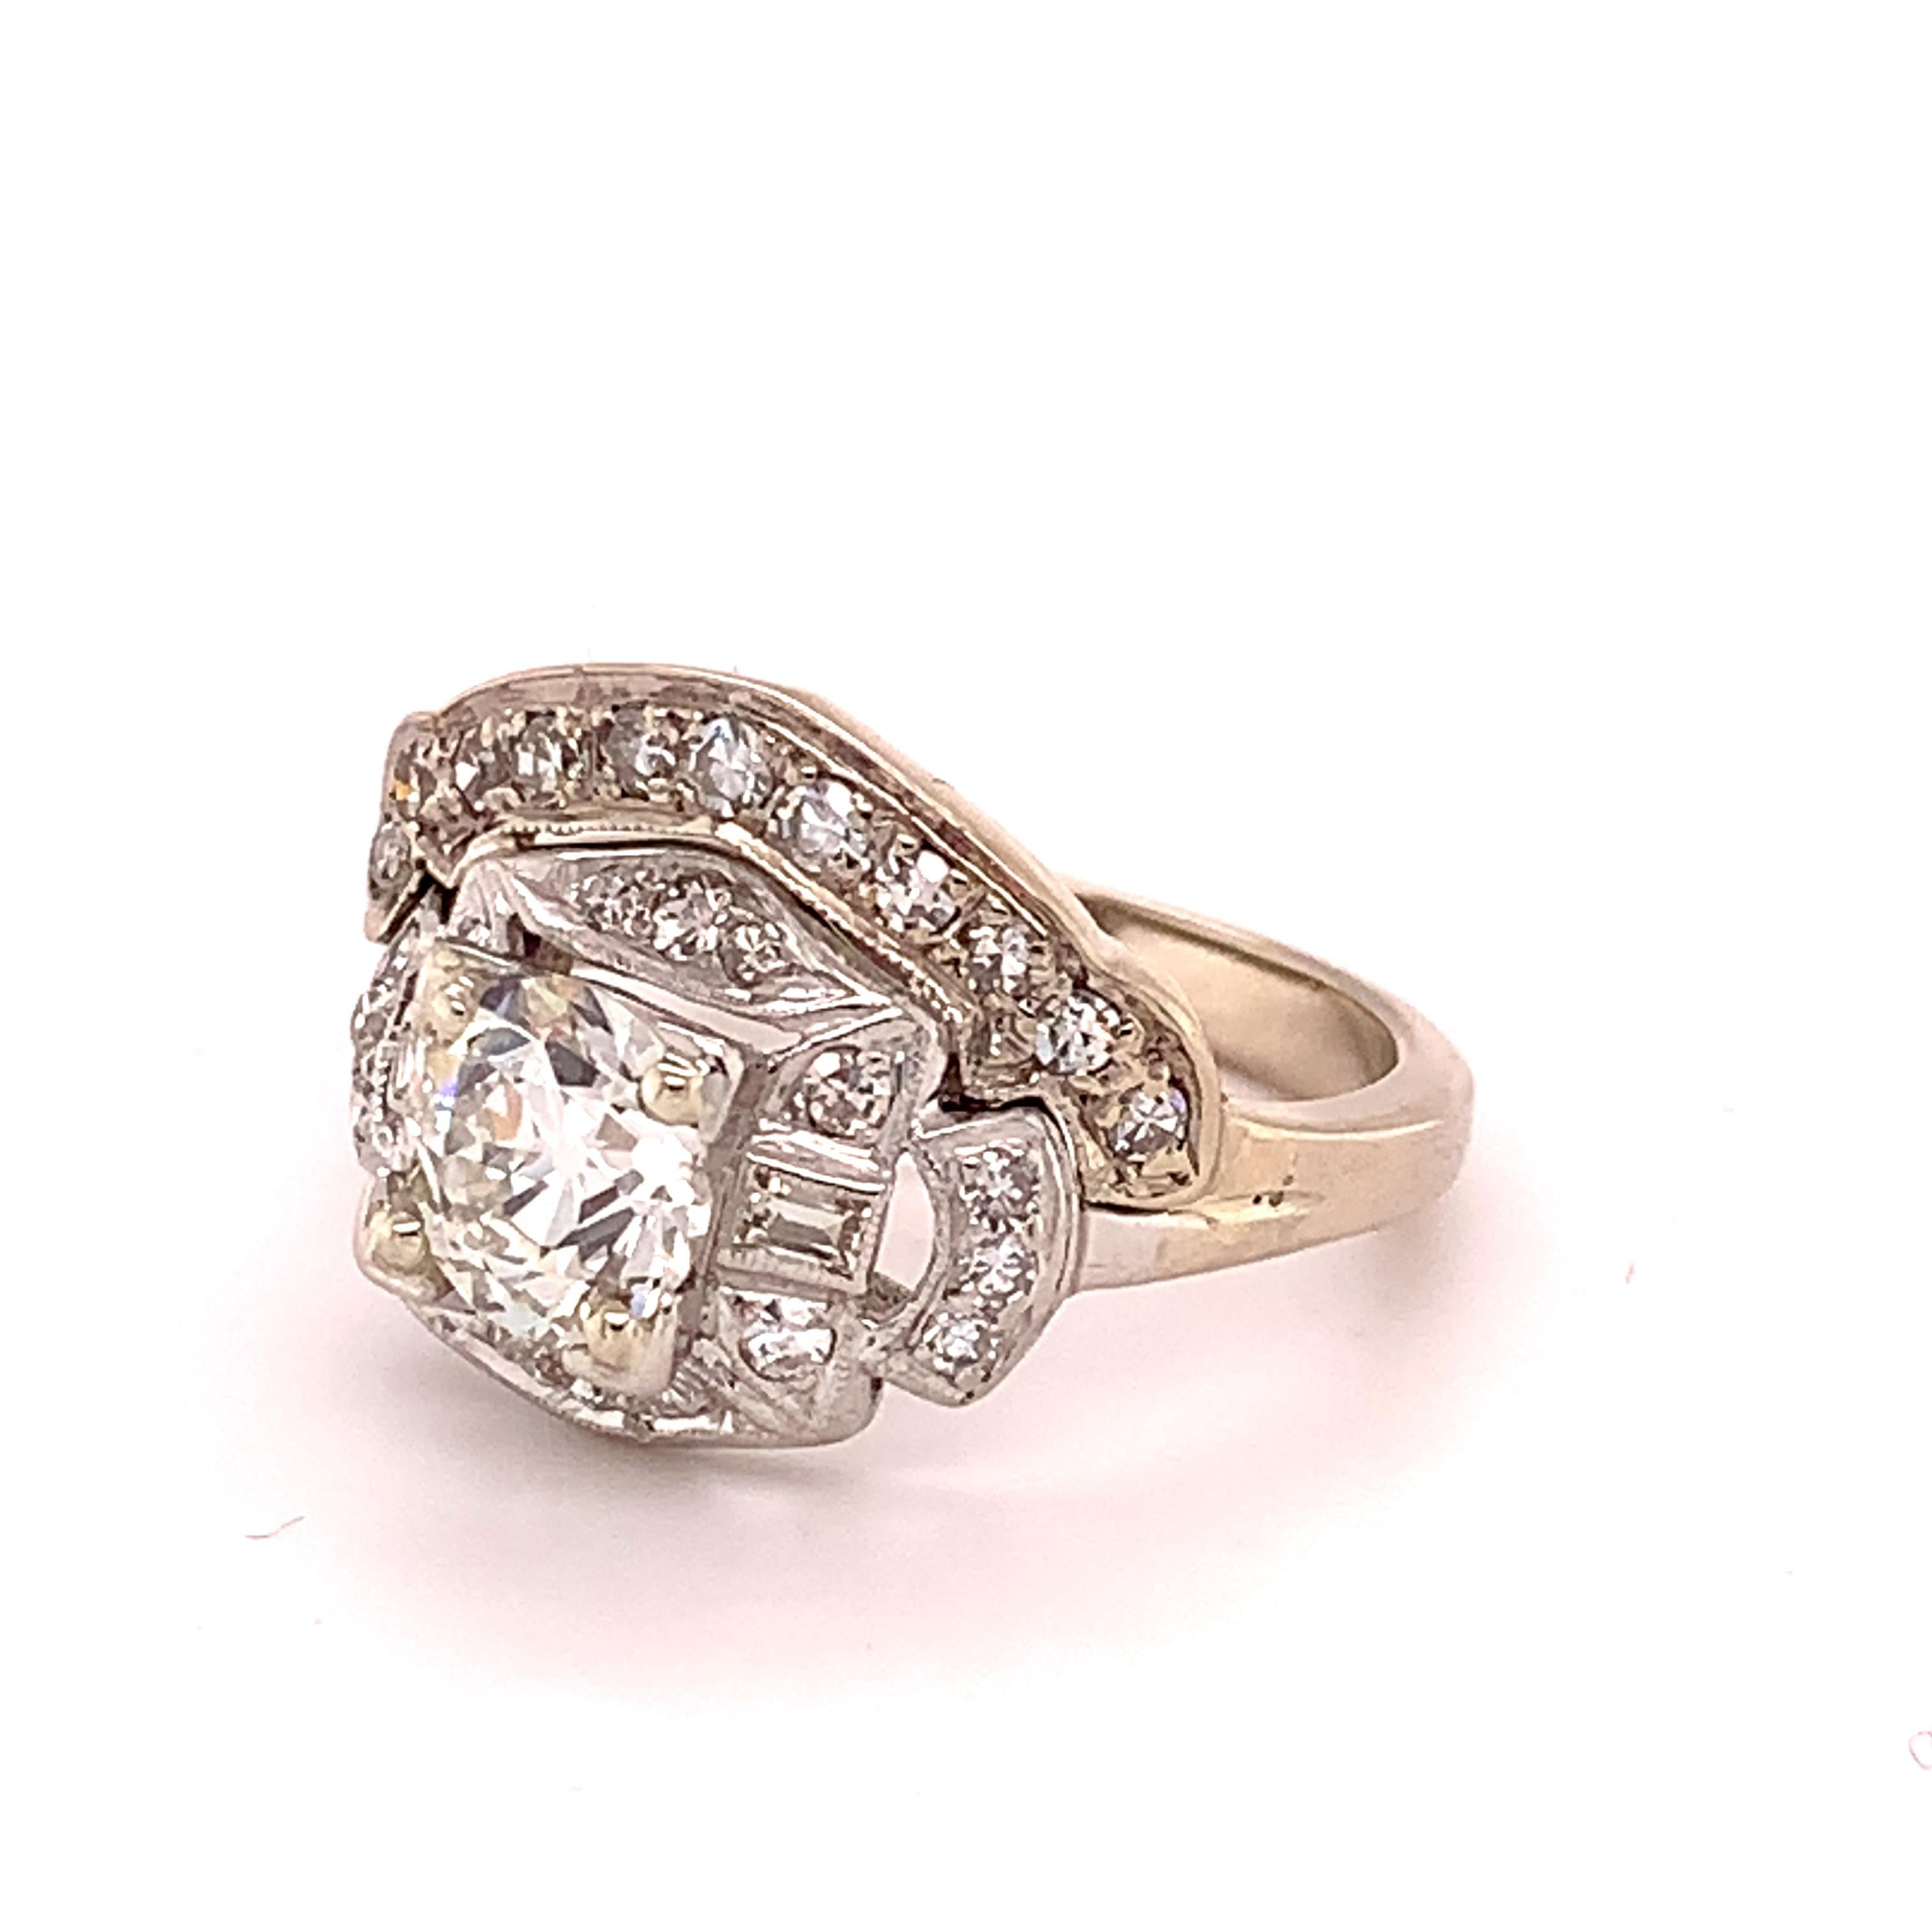 Platinum Ring 1.05ct Center European Genuine Natural Diamond (#J4888)

Vintage platinum diamond wedding set with attached band featuring a white European cut diamond weighing 1.05 carats. The diamond is I color SI2 clarity and measures exactly